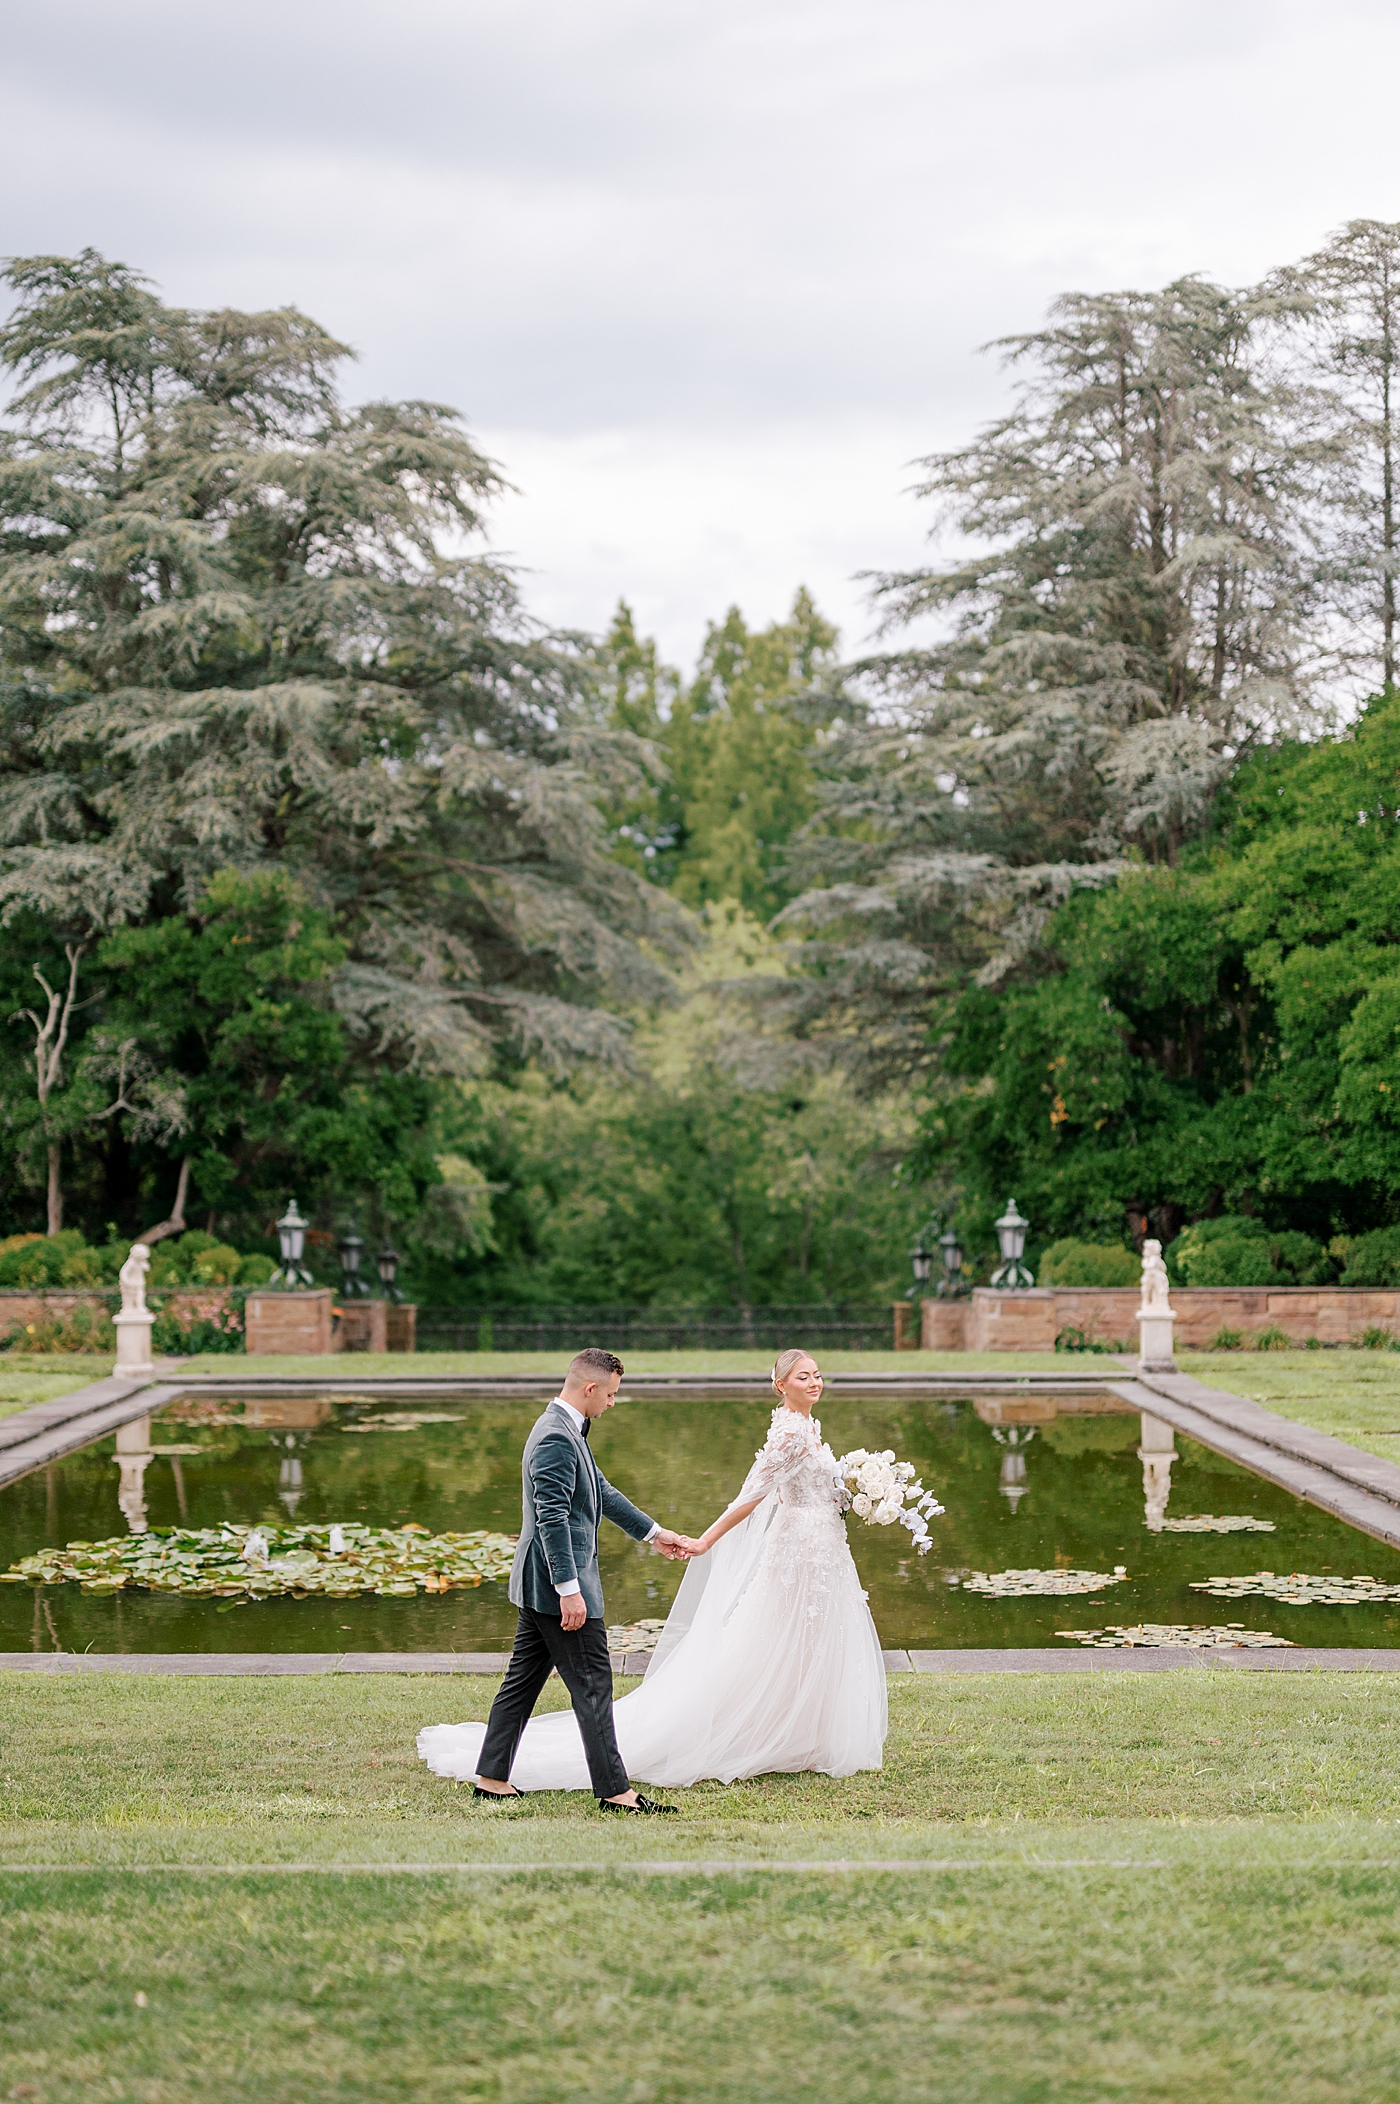 Bride and groom walking hand in hand through a garden | Image by Hope Helmuth Photography